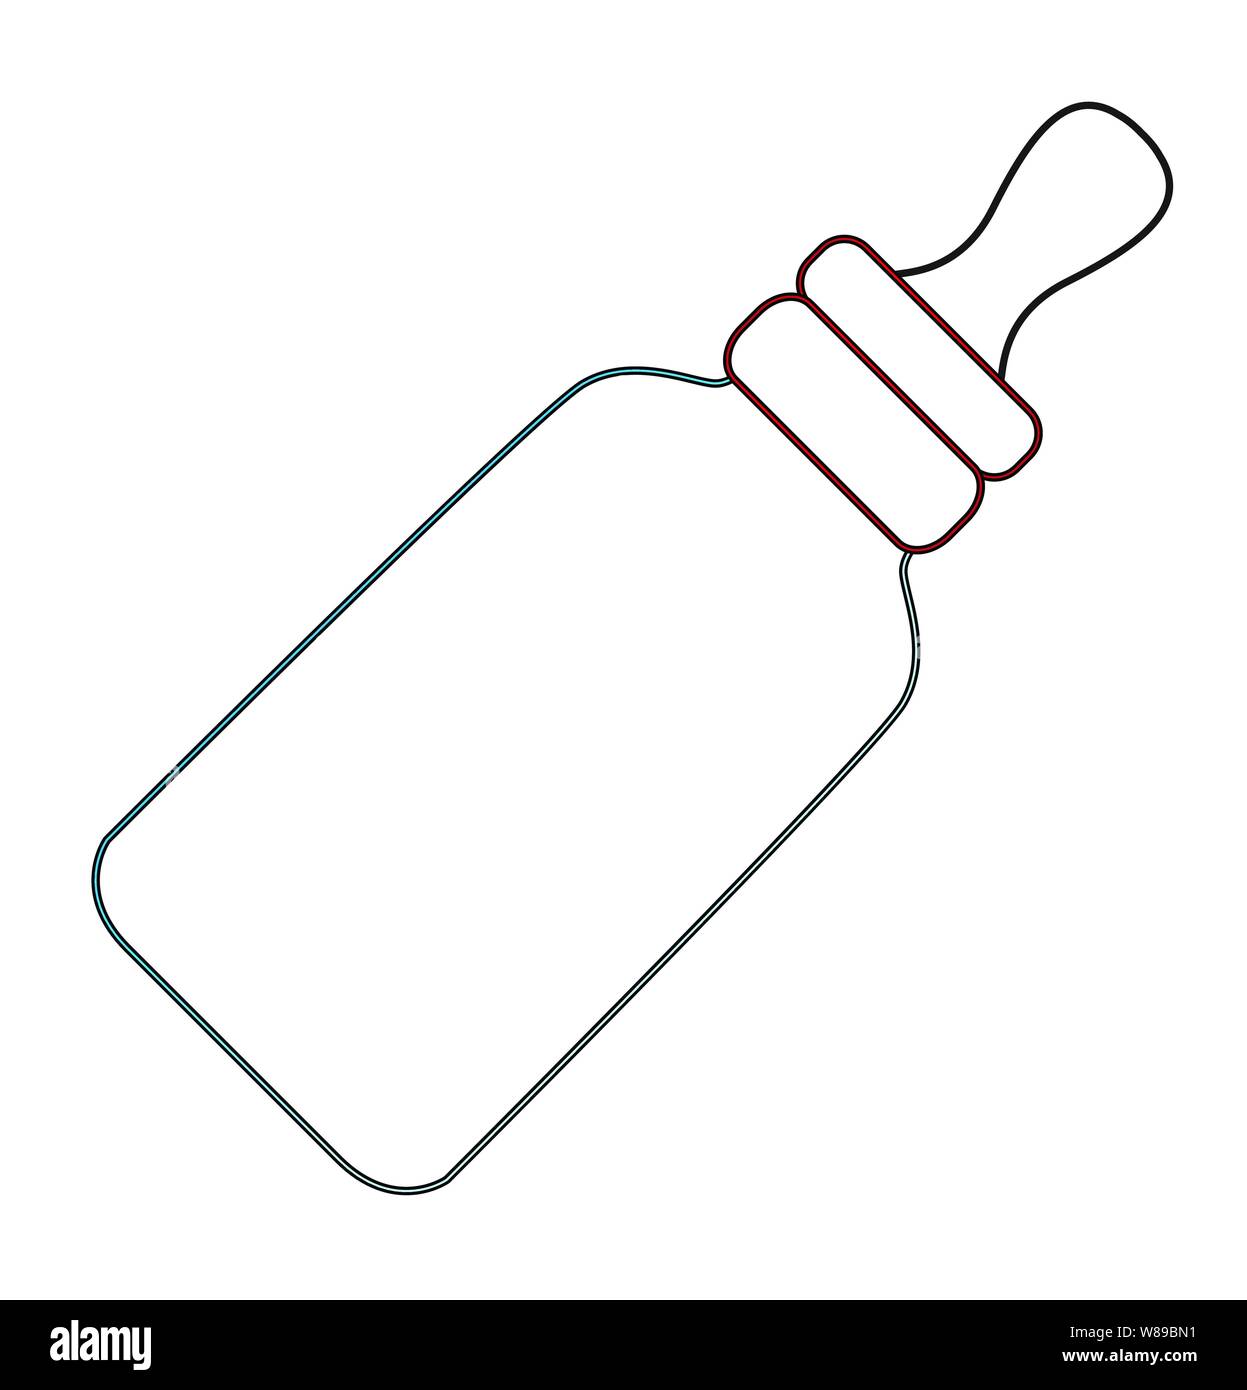 A babies milk bottle feeder as a line drawing isolated on a white background Stock Vector